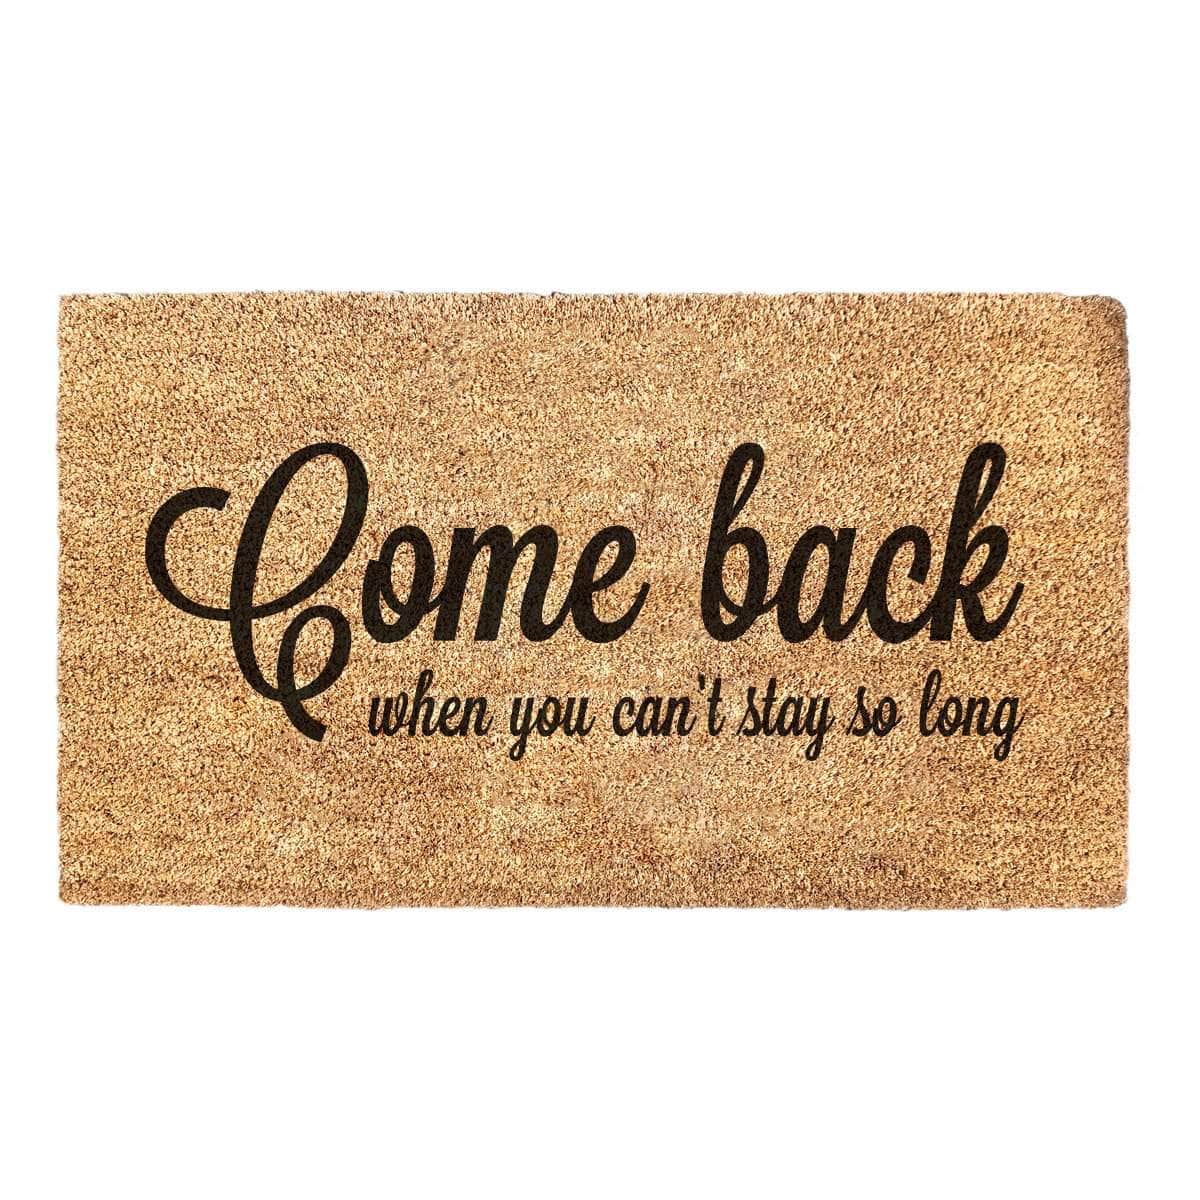 Come Back When You Can't Stay So Long - Doormat